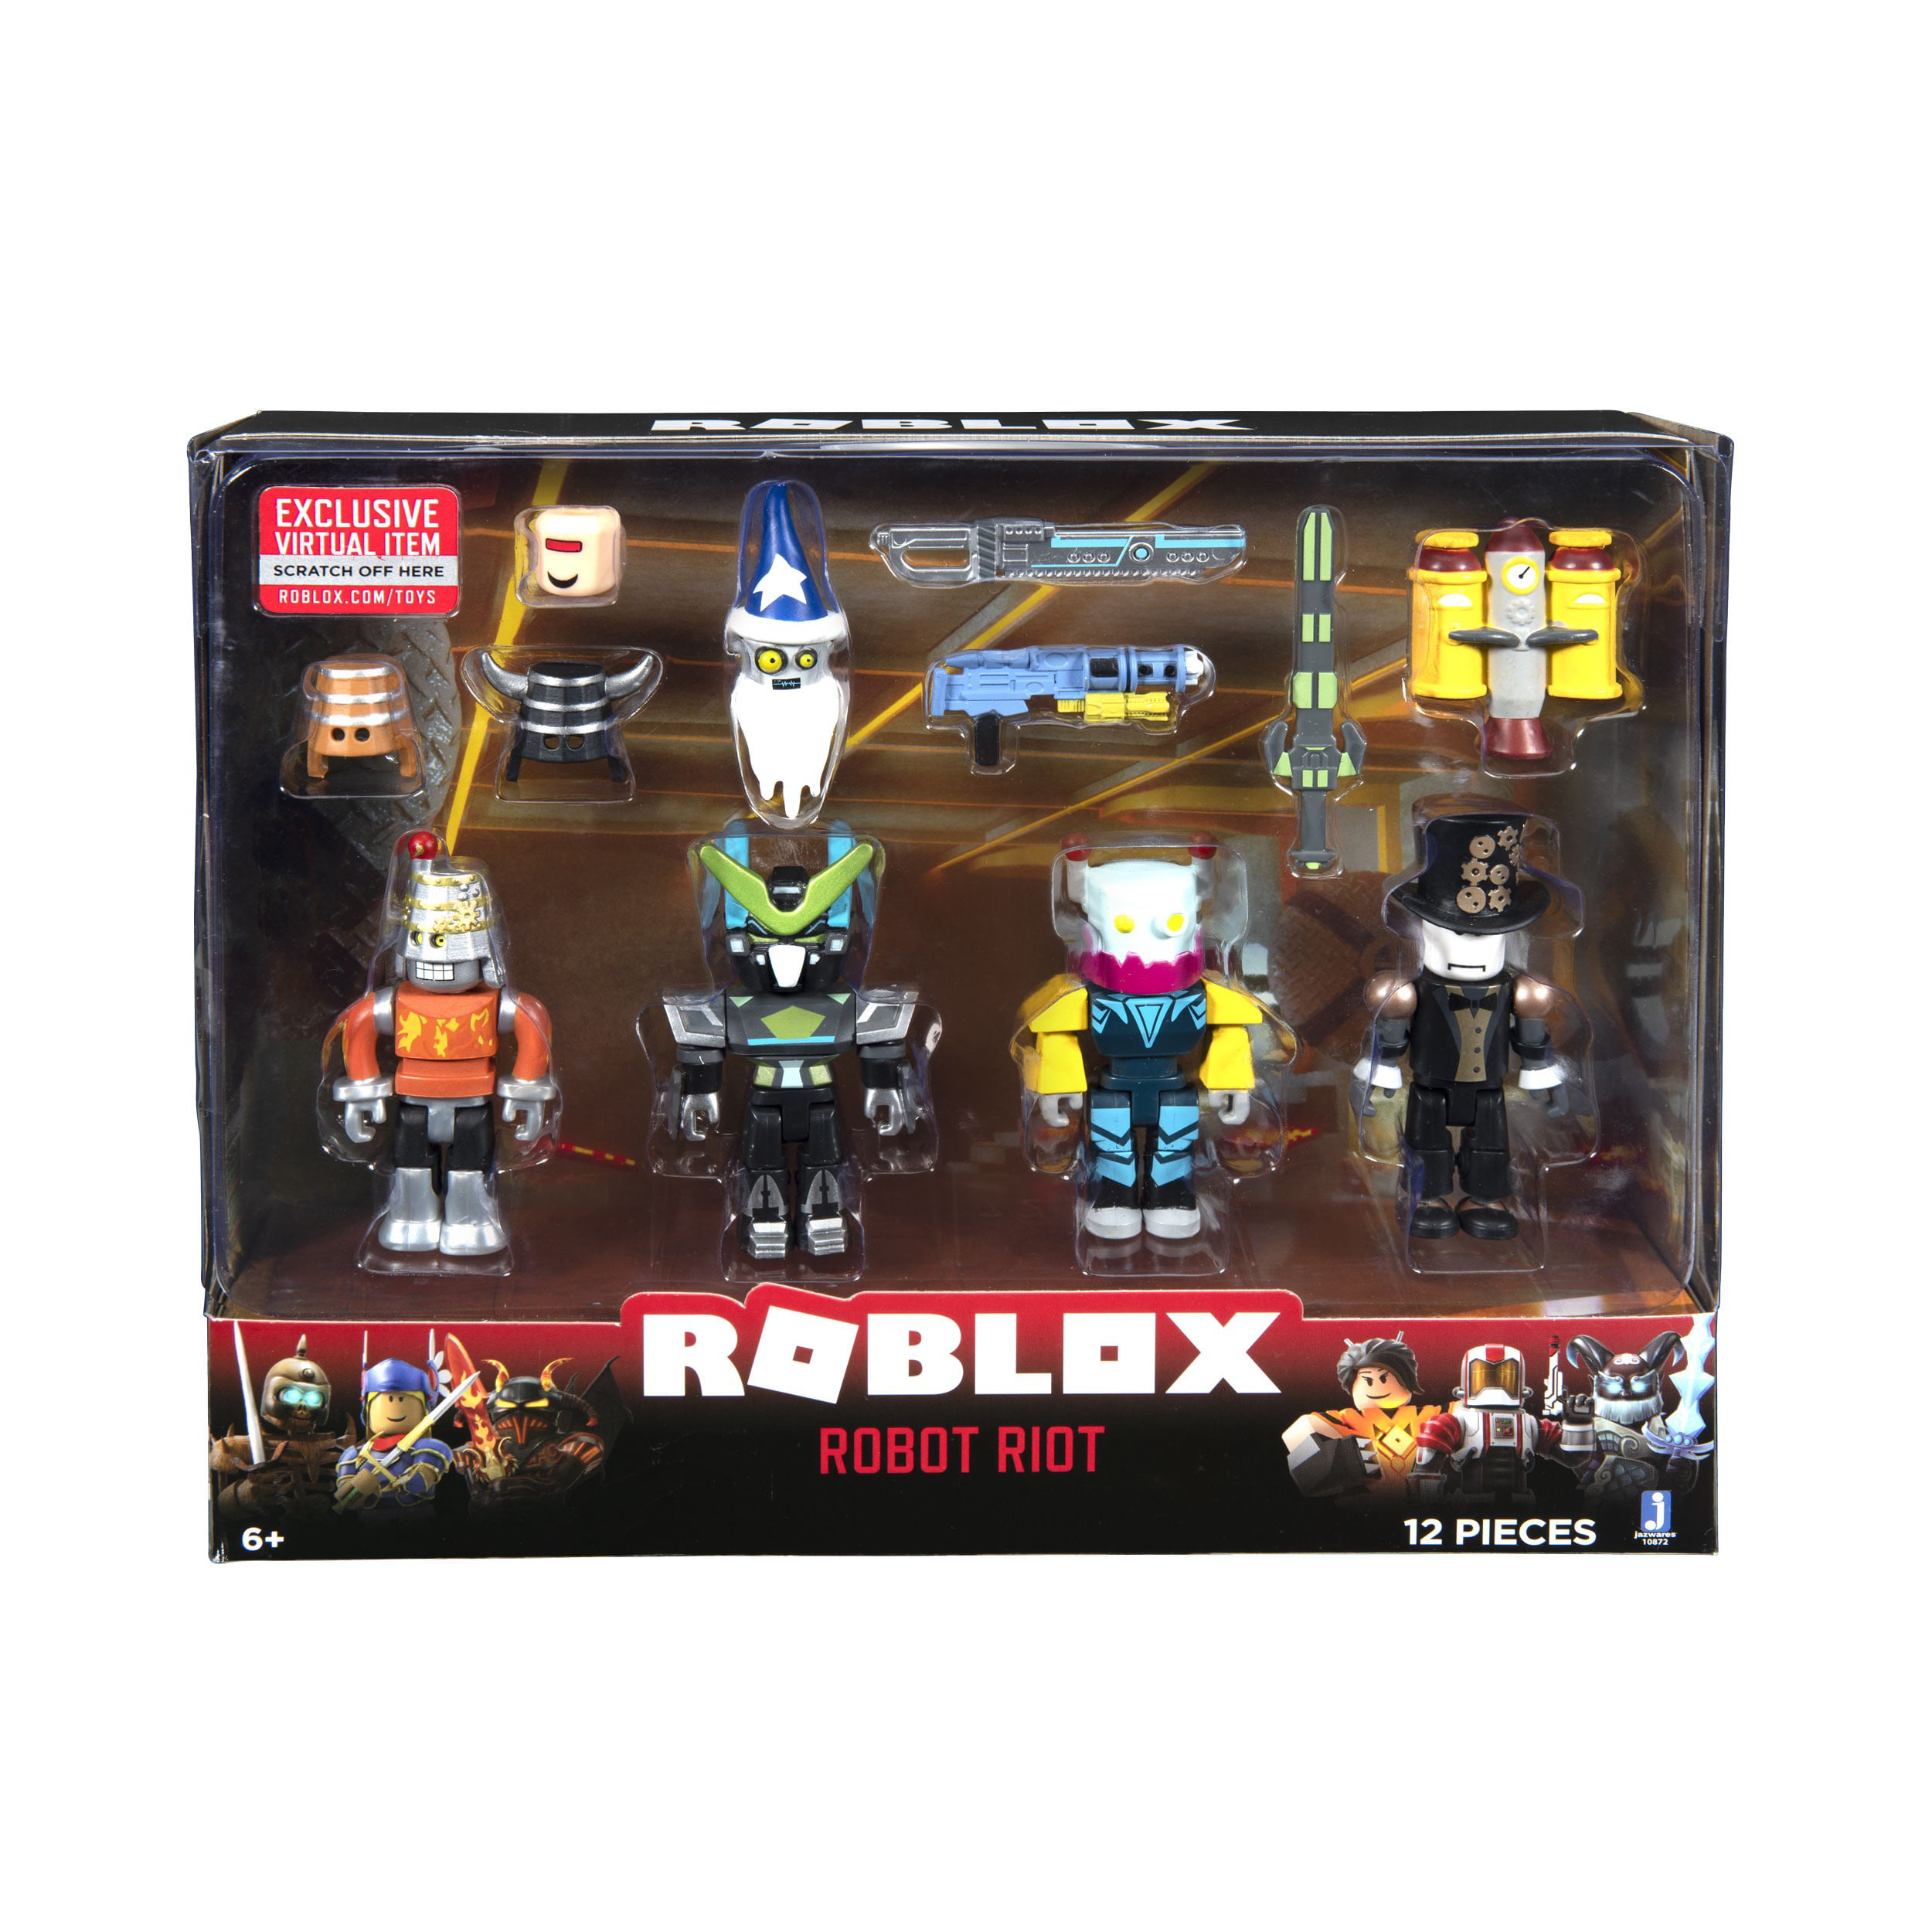 Roblox Action Collection Robot Riot Four Figure Pack Includes Exclusive Virtual Item Walmart Com Walmart Com - robot roblox toy